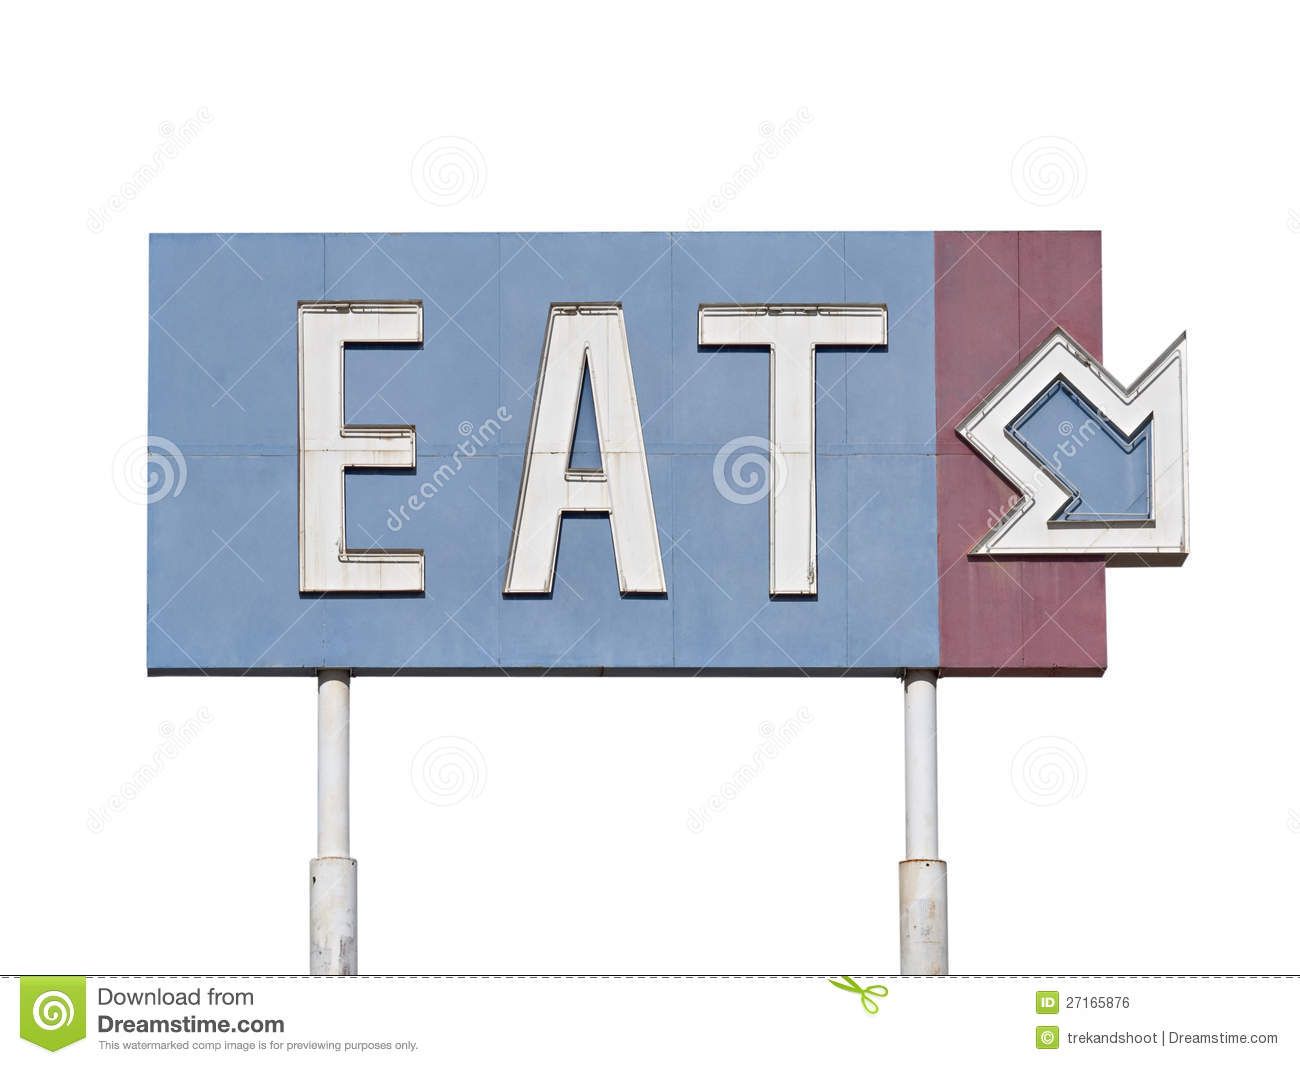 Vintage Eat Arrow Sign Royalty Free Stock Image   Image  27165876